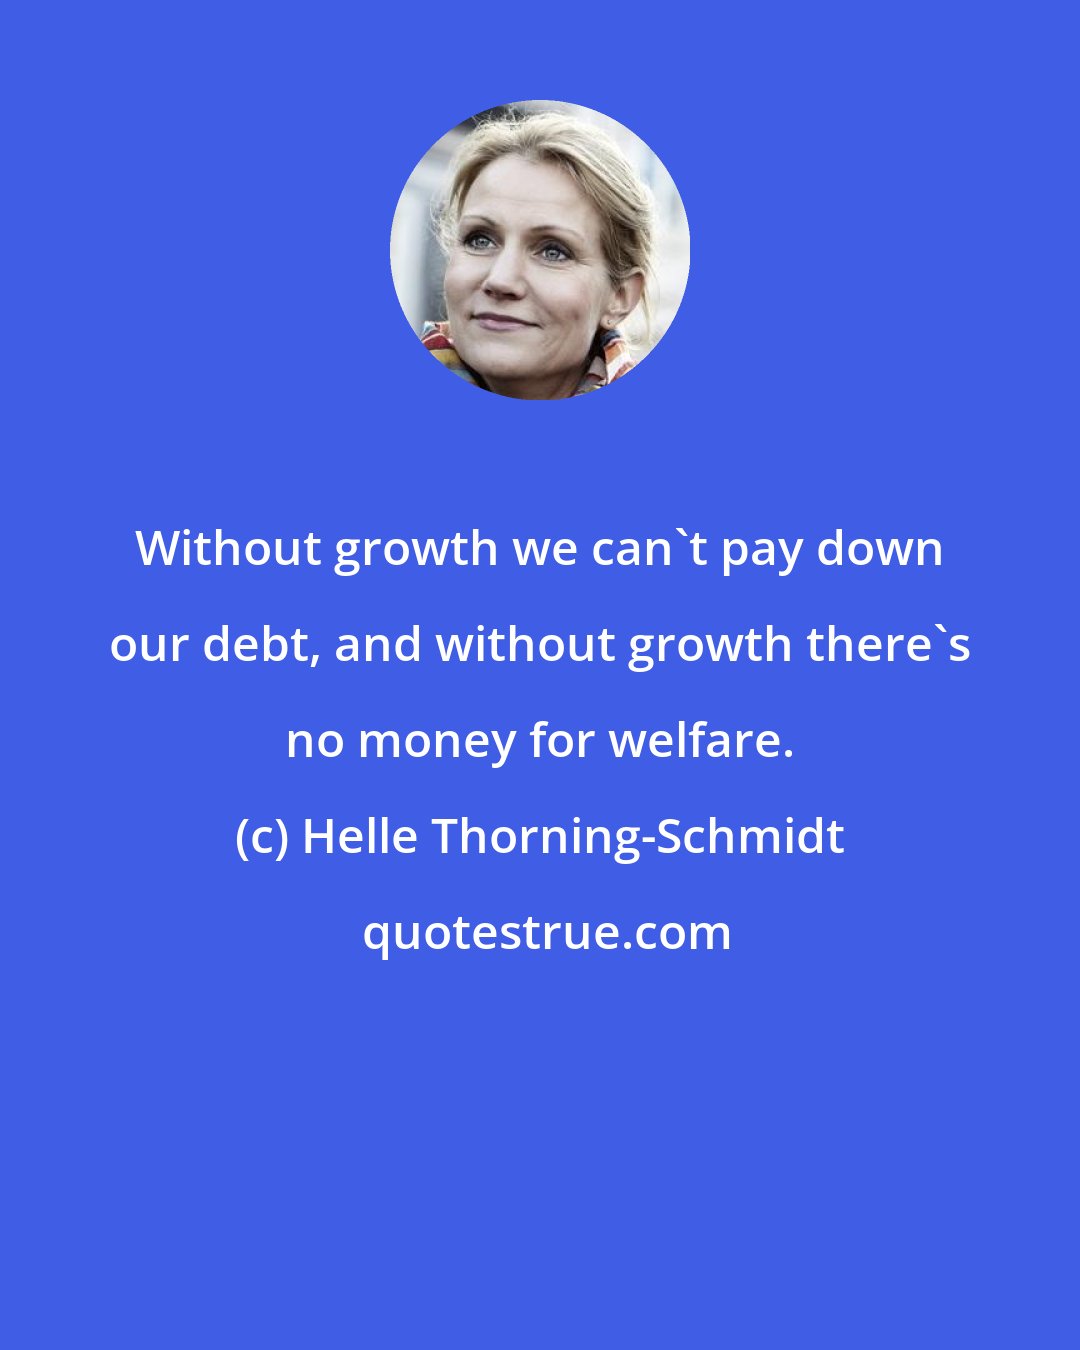 Helle Thorning-Schmidt: Without growth we can't pay down our debt, and without growth there's no money for welfare.